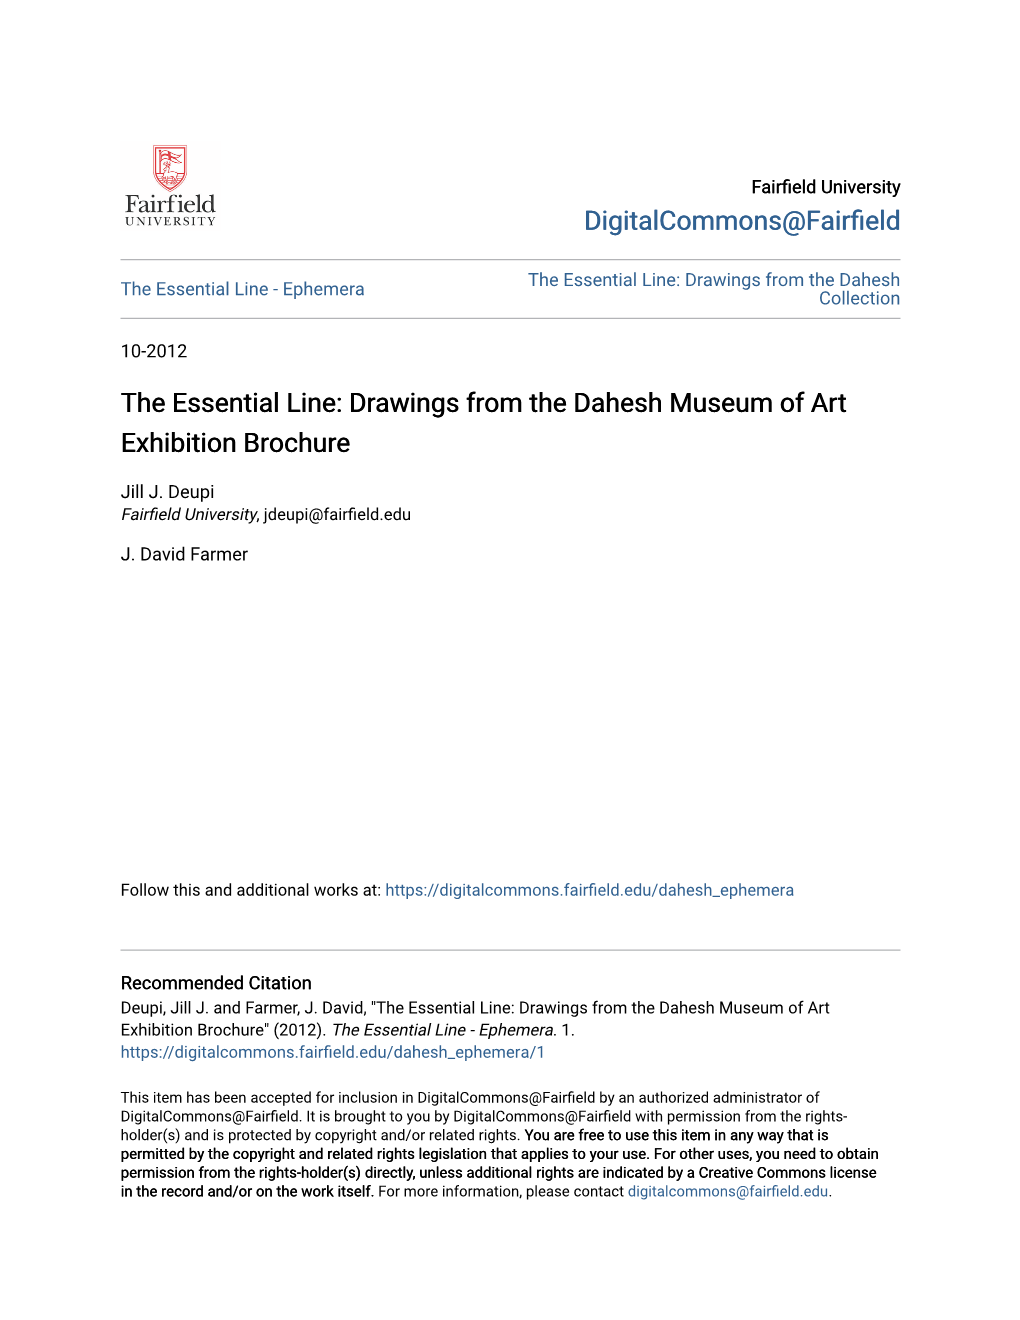 Drawings from the Dahesh Museum of Art Exhibition Brochure